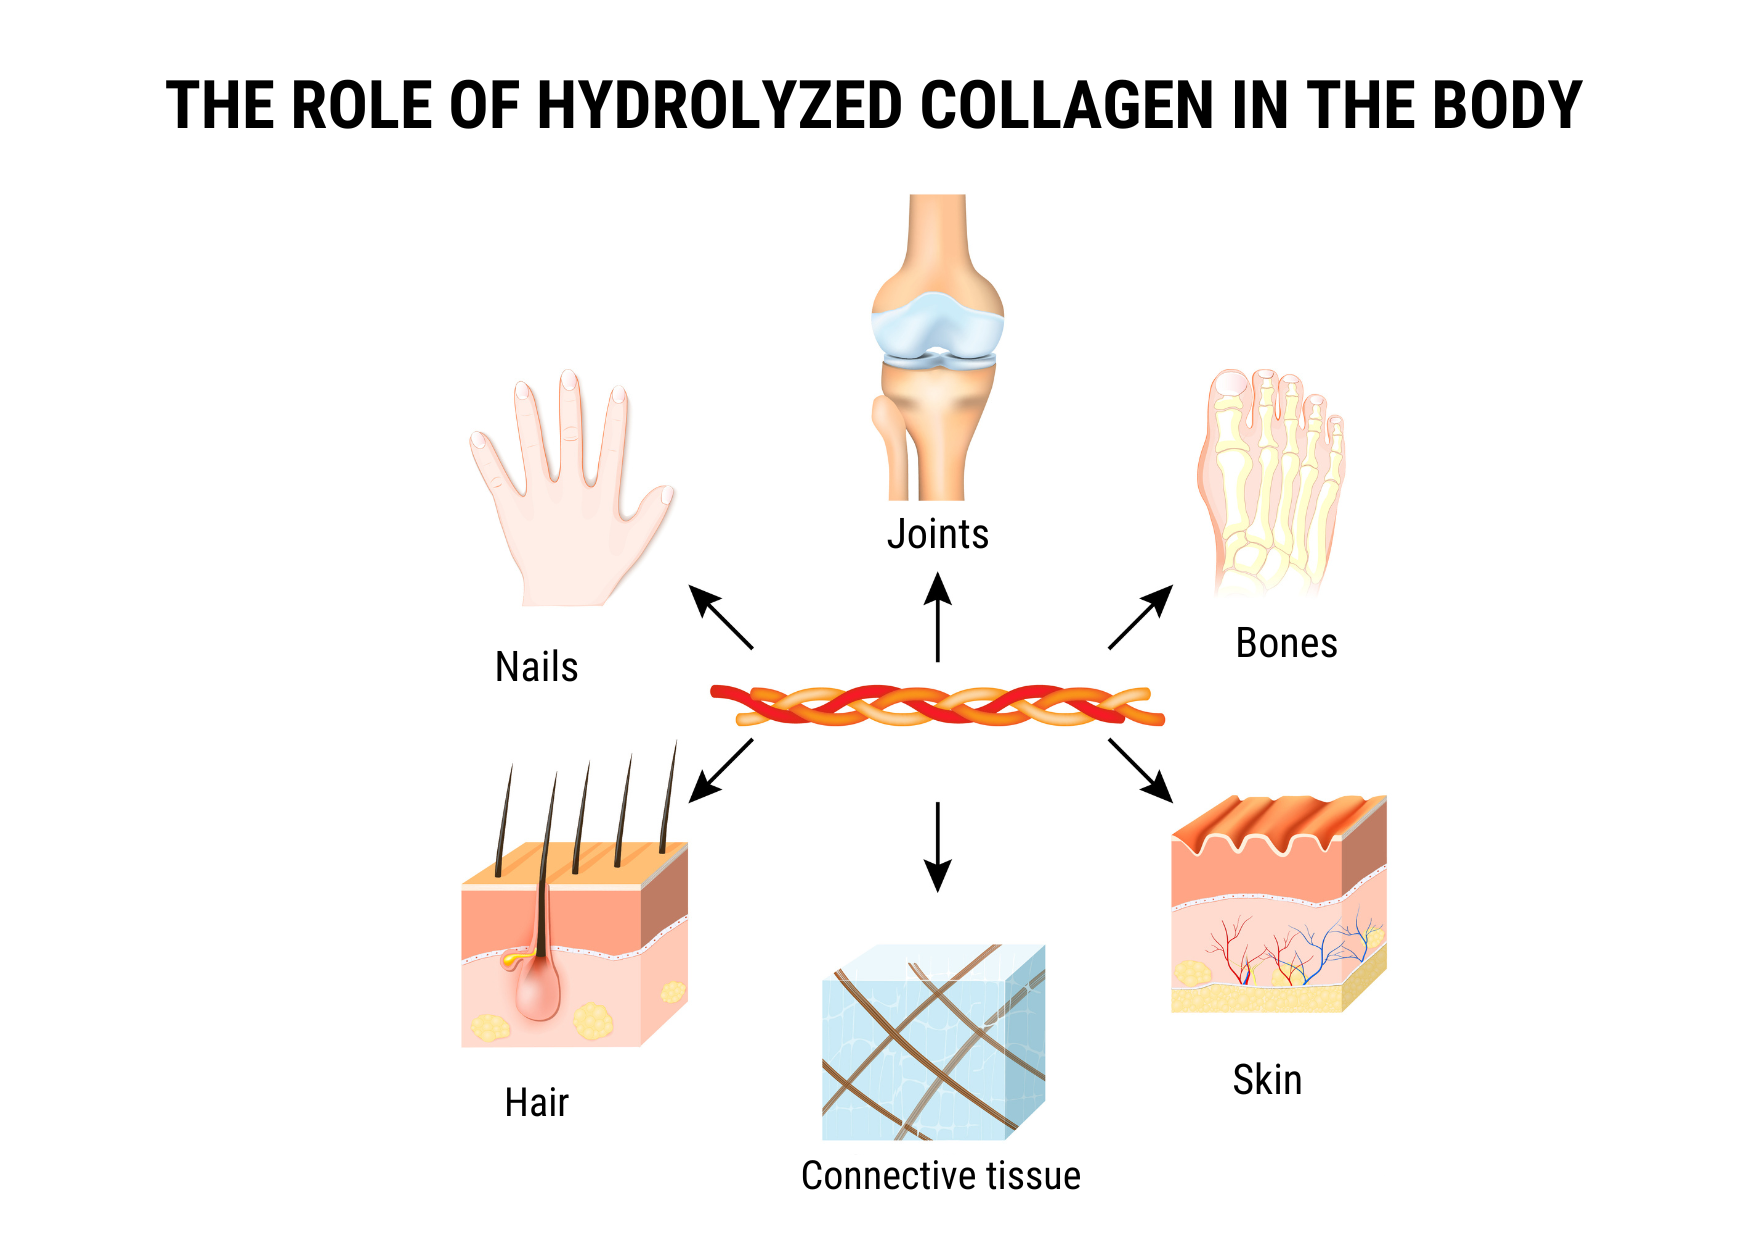 The role of hydrolyzed collagen in the body